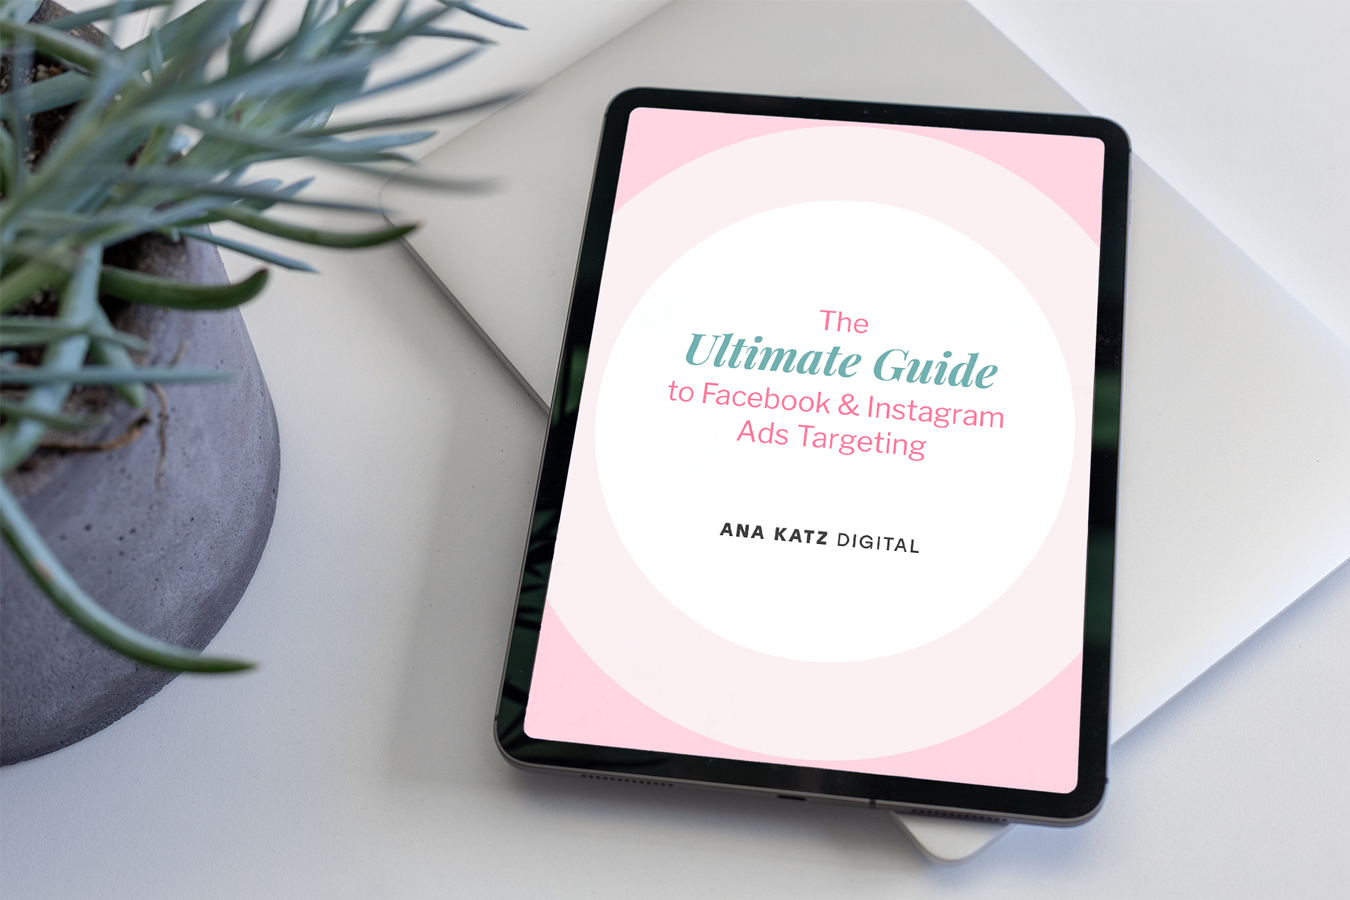 The Ultimate Guide to Facebook & Instagram Ads Targeting